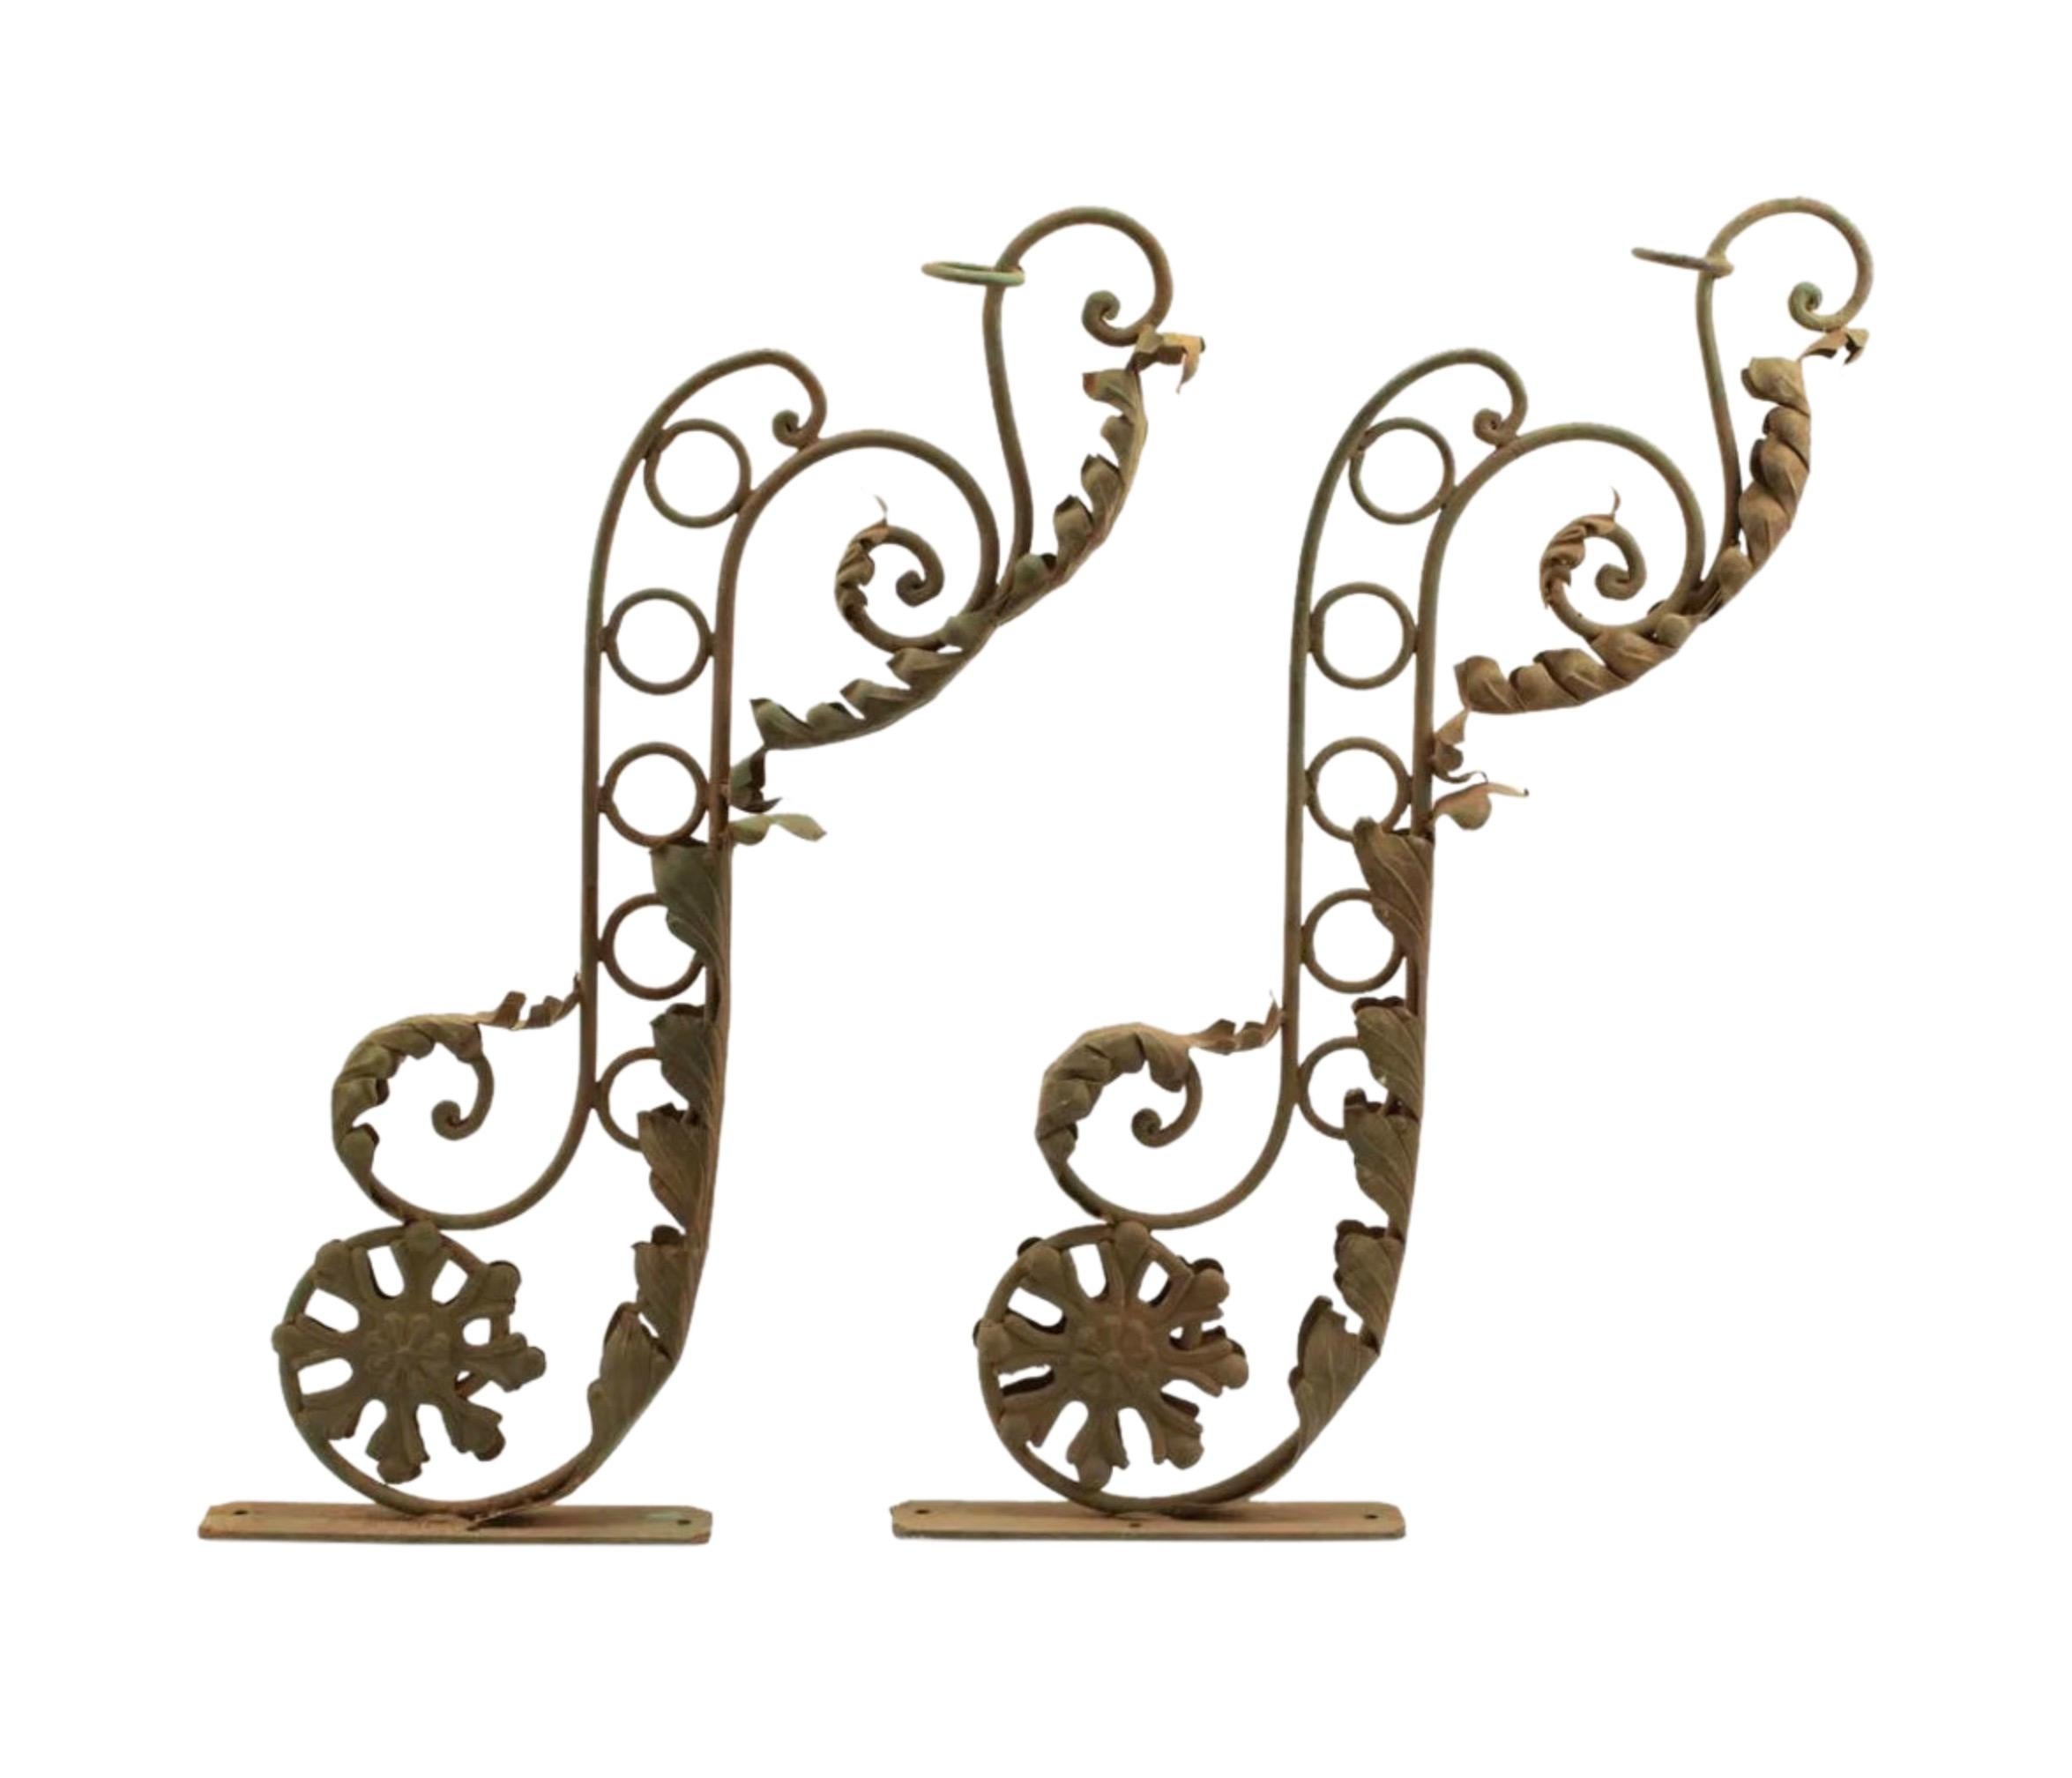 New Orleans Wrought Iron Foliate Scroll Sign Brackets - a Pair